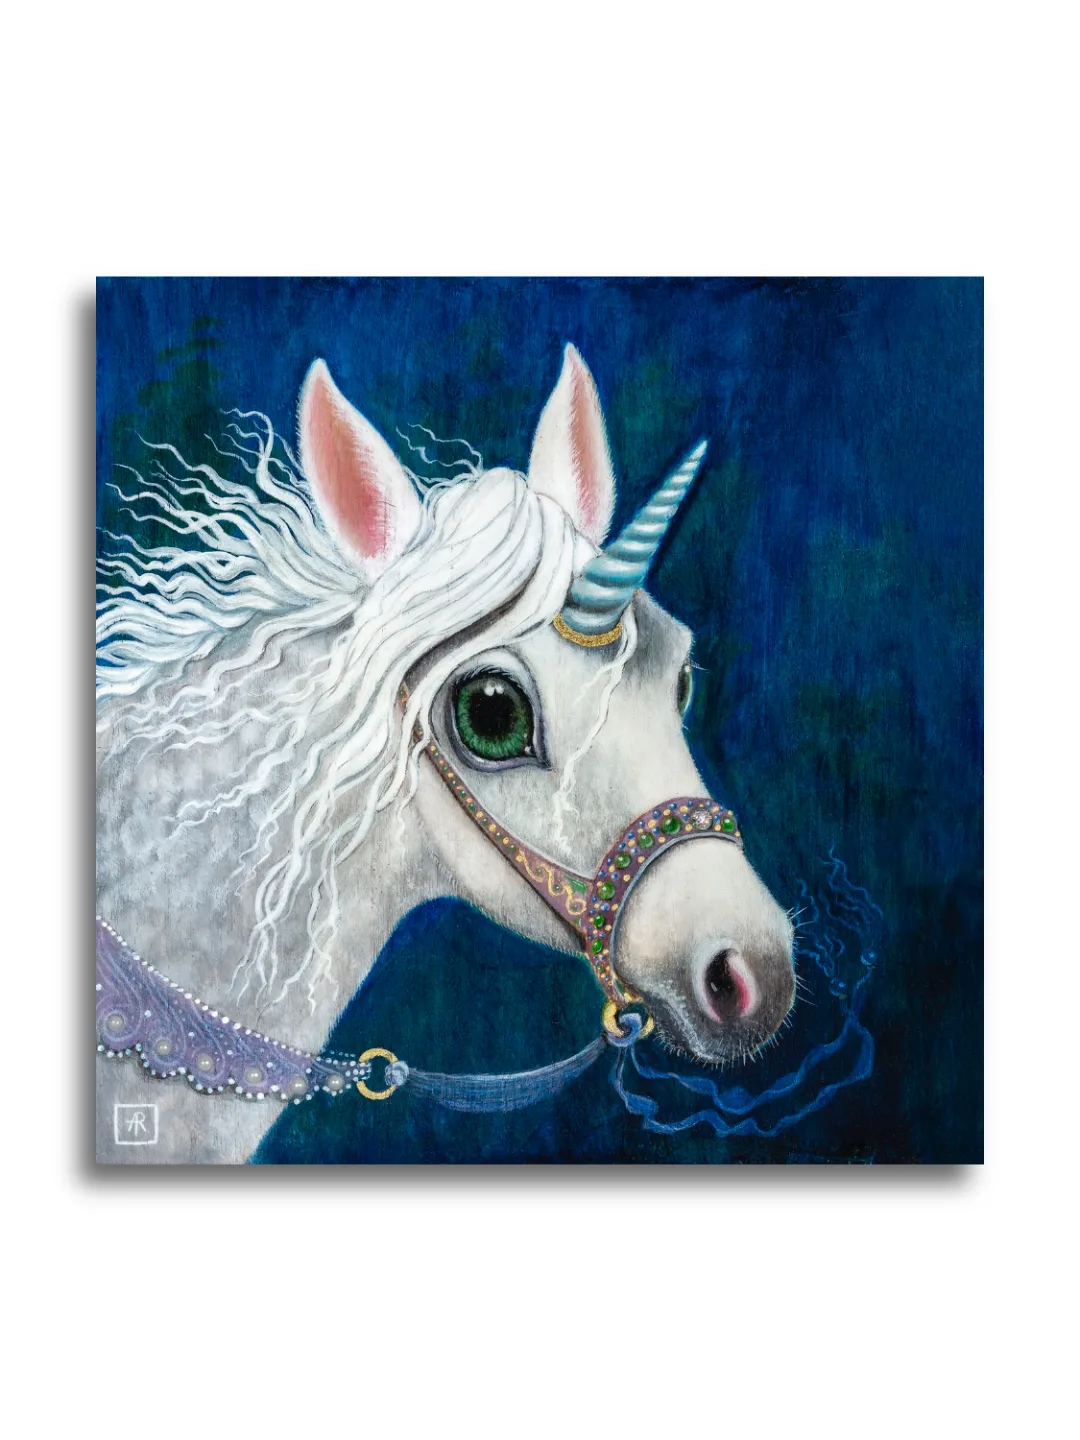 Unicorn by Ann Richmond - A stunning, Original artwork featuring a Unicorn. Painted in the artist's unique style... Framing available.